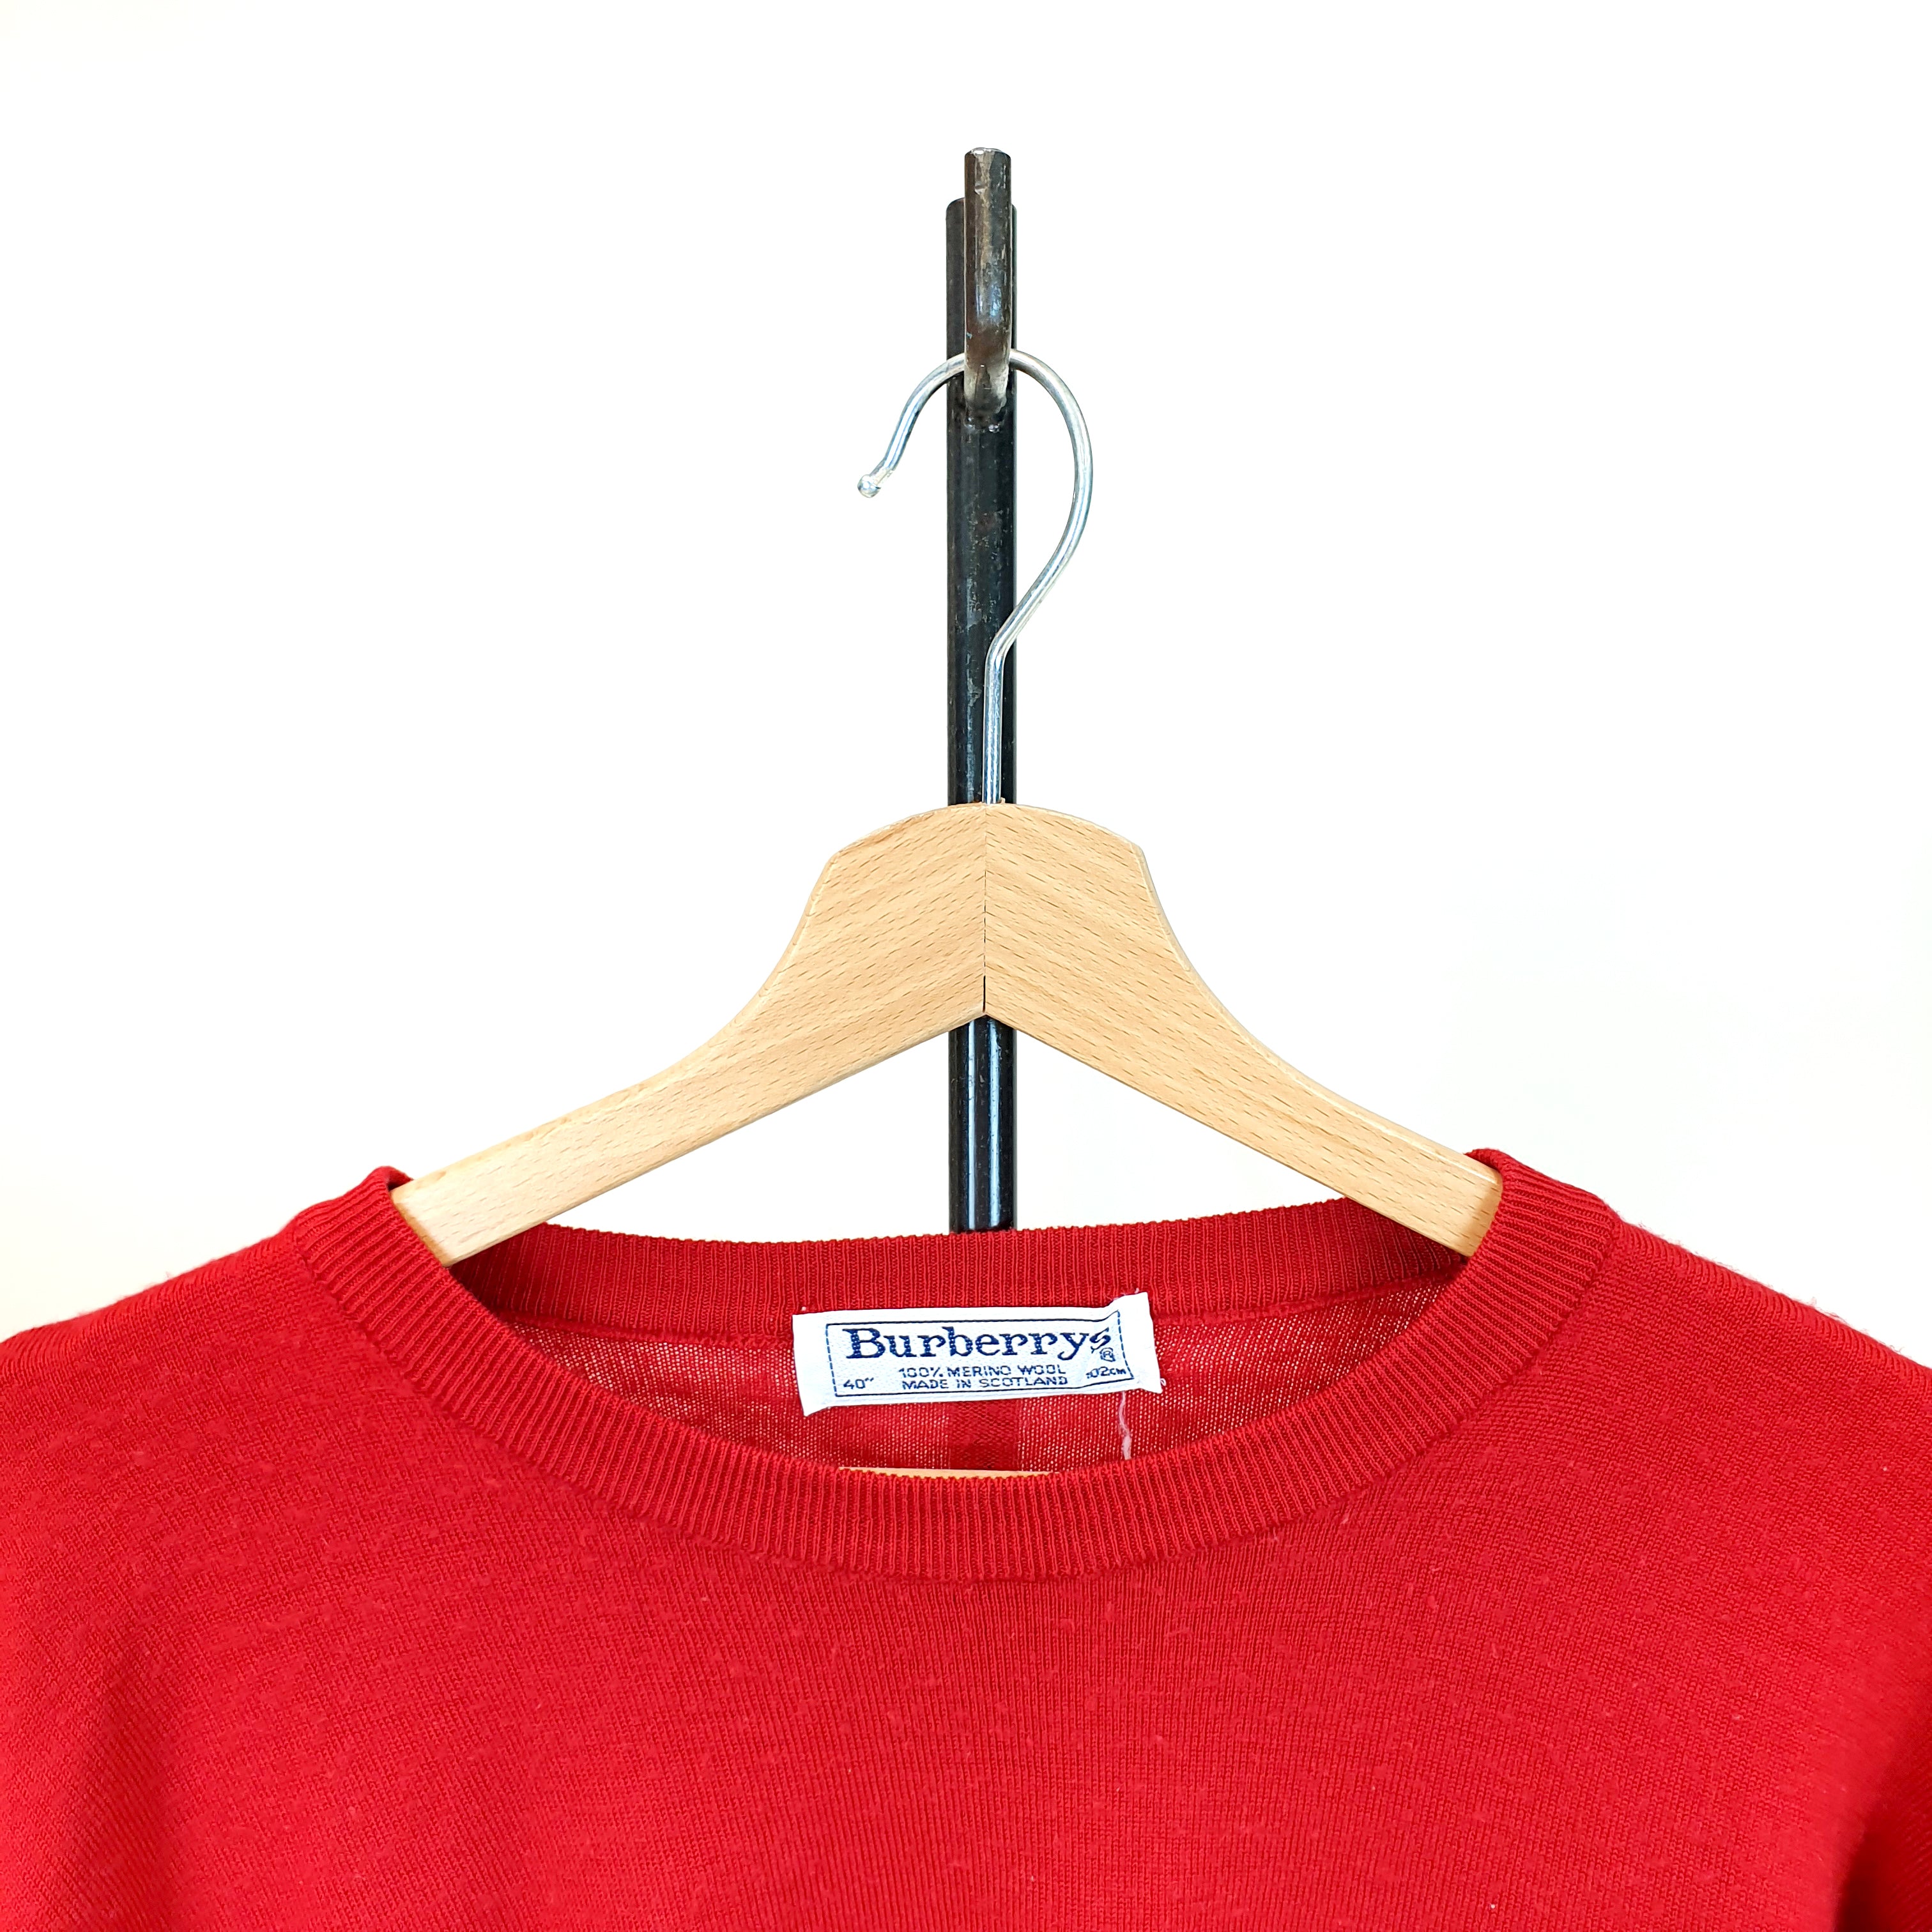 Burberry Red Jumper